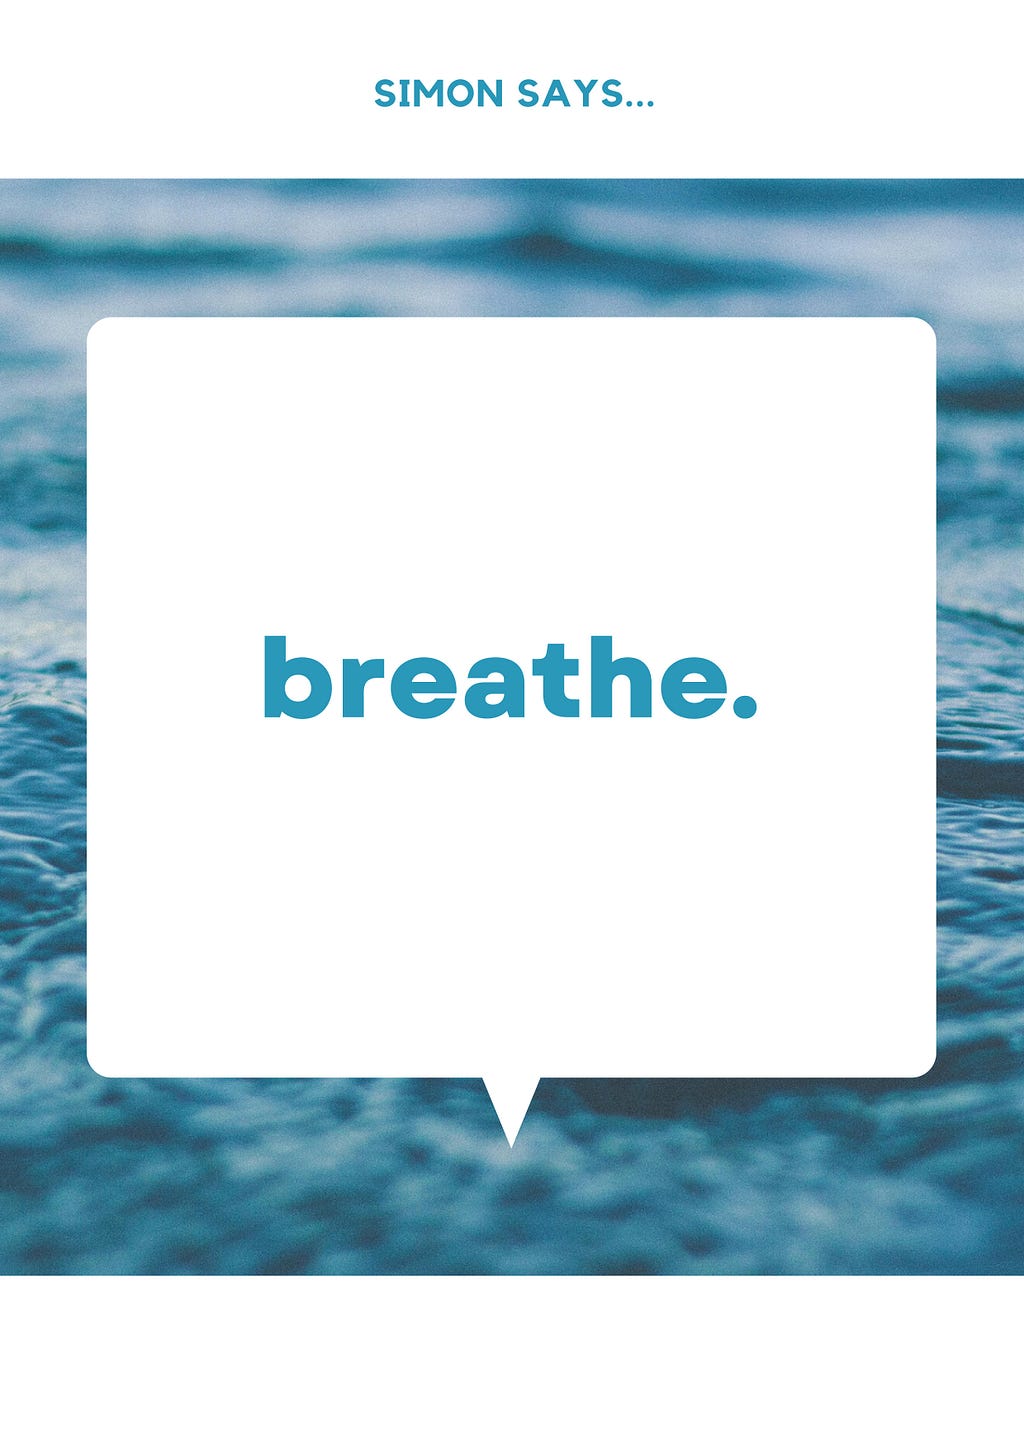 Picture with water as background, which reads ‘Simon says breathe.’